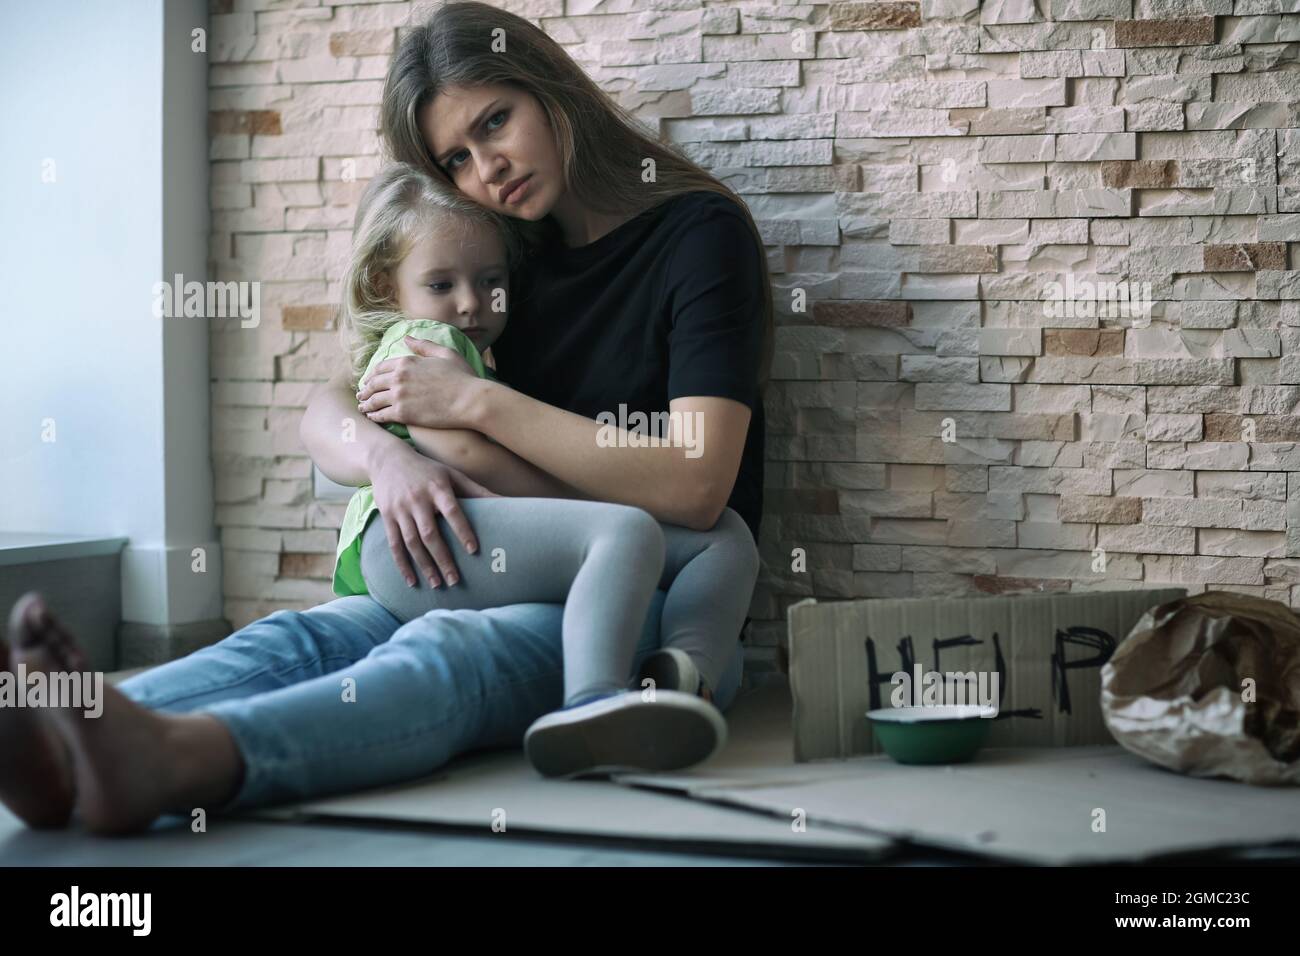 Homeless Poor Woman And Her Little Daughter Sitting Near Brick Wall And Asking For Help Stock